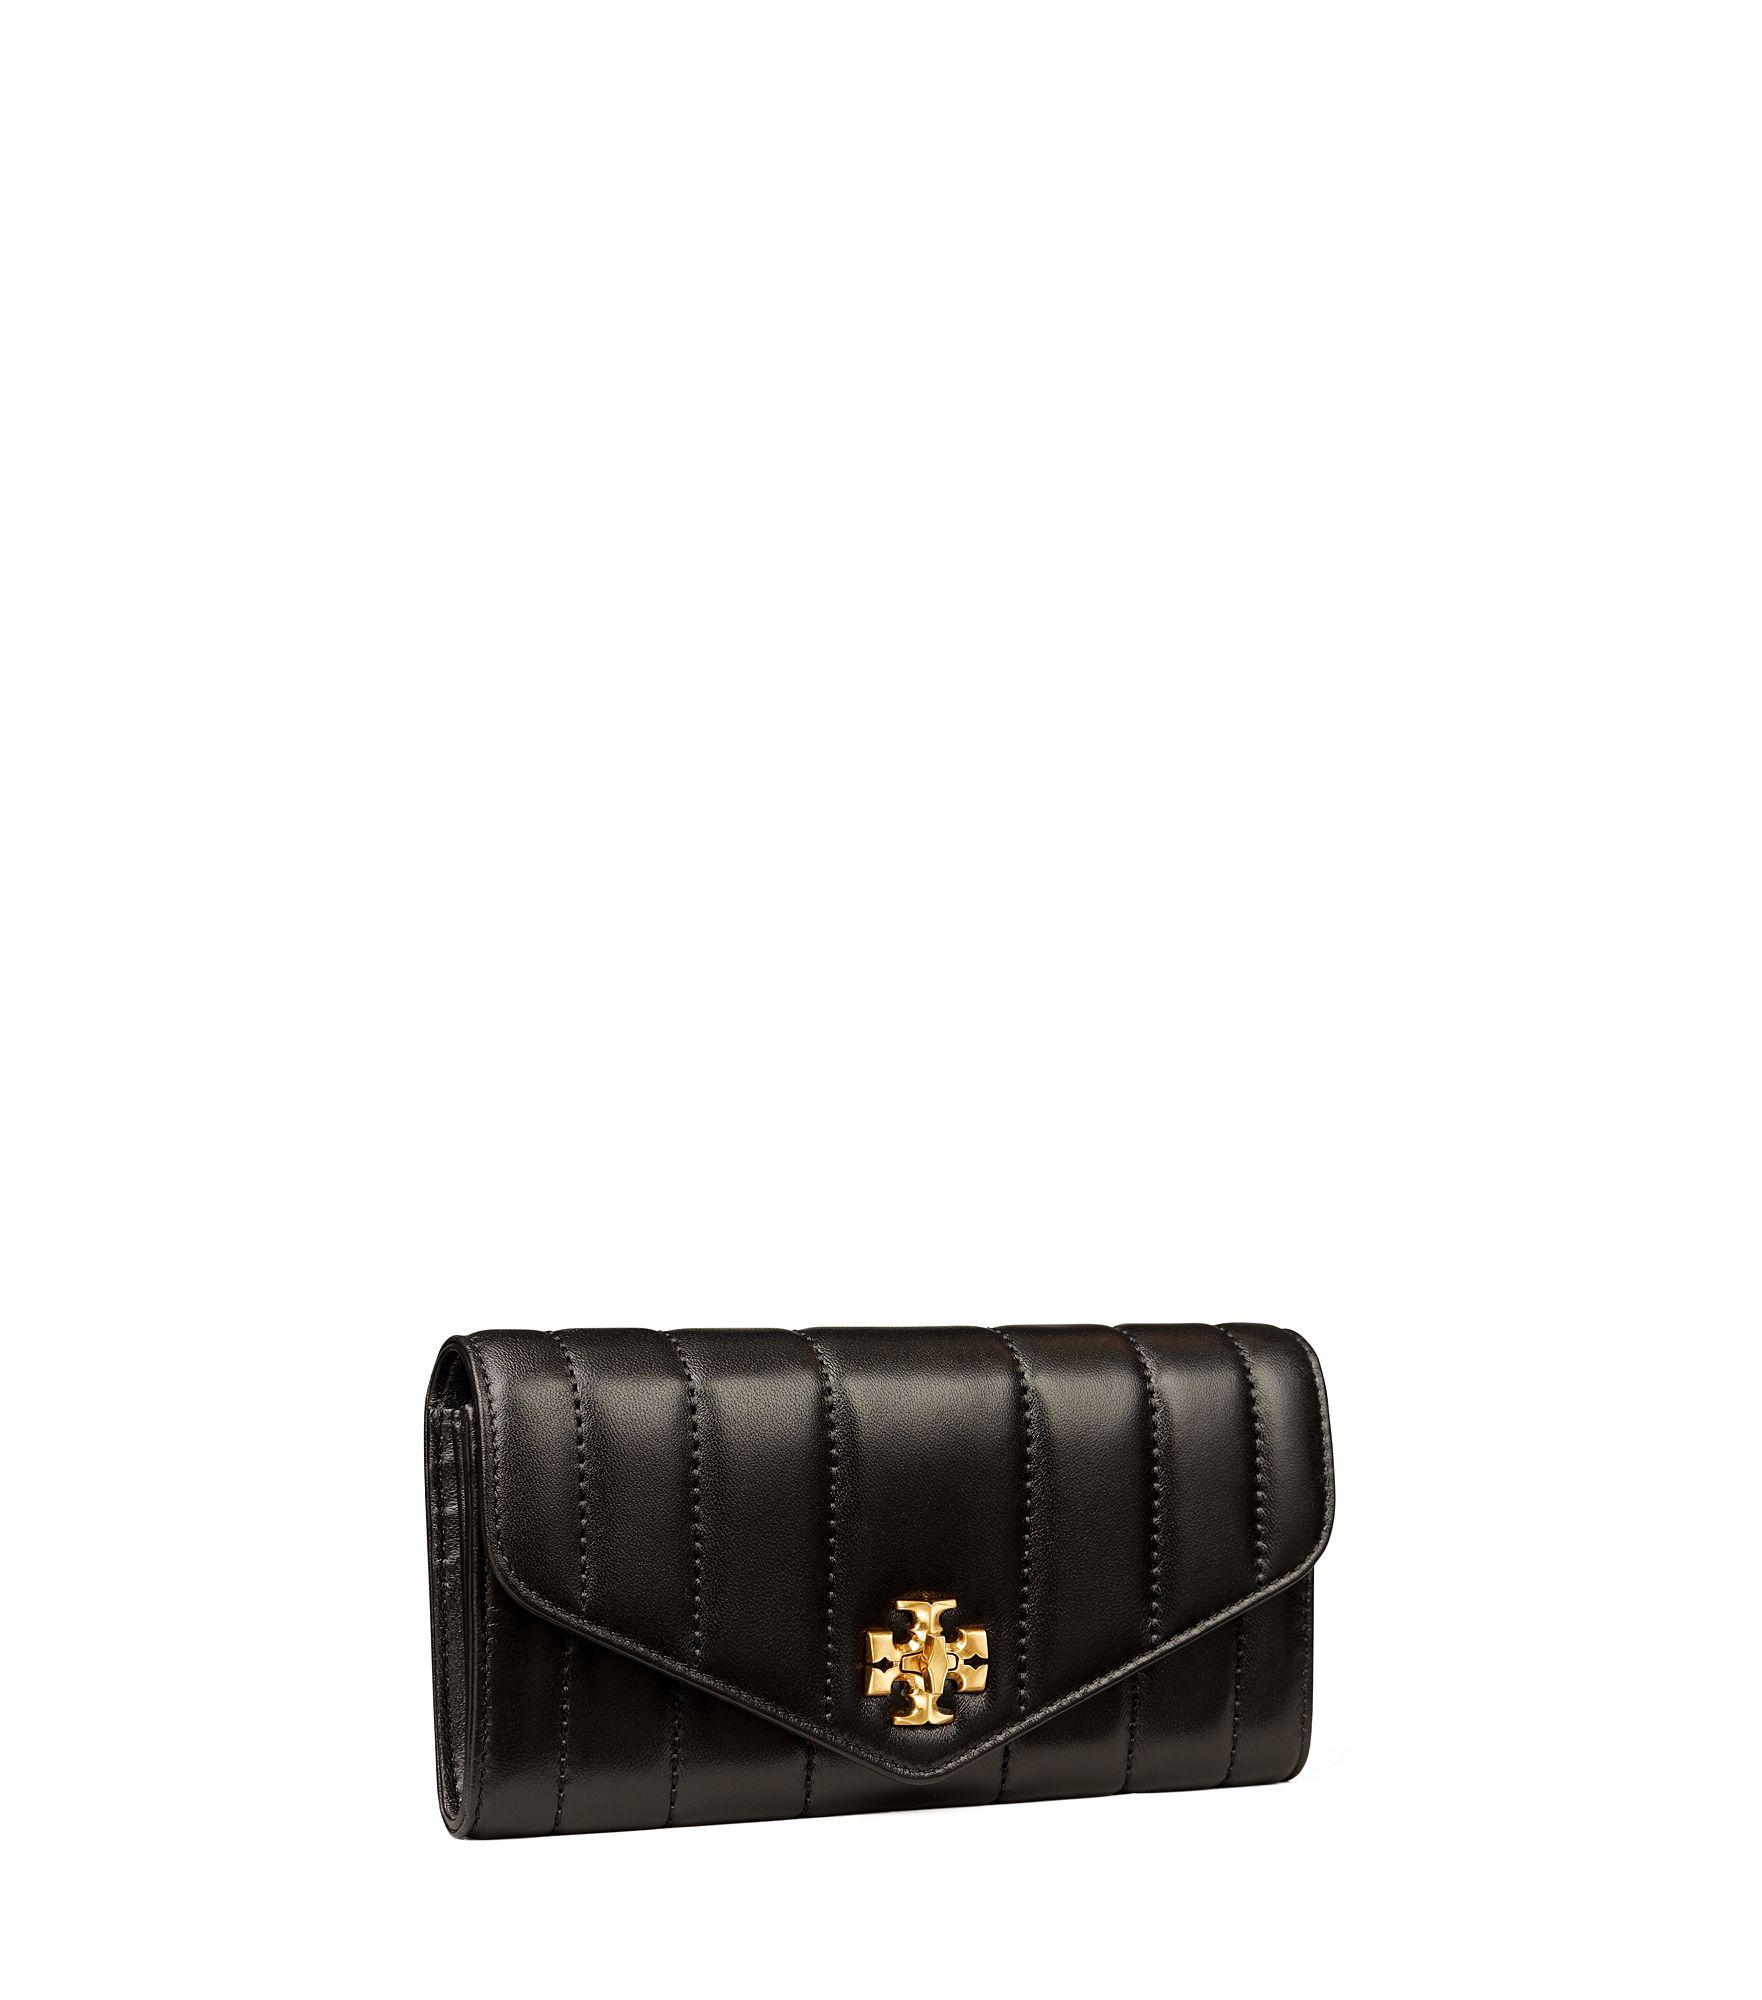 Tory Burch Kira Quilted Envelope Wallet in Black | Lyst